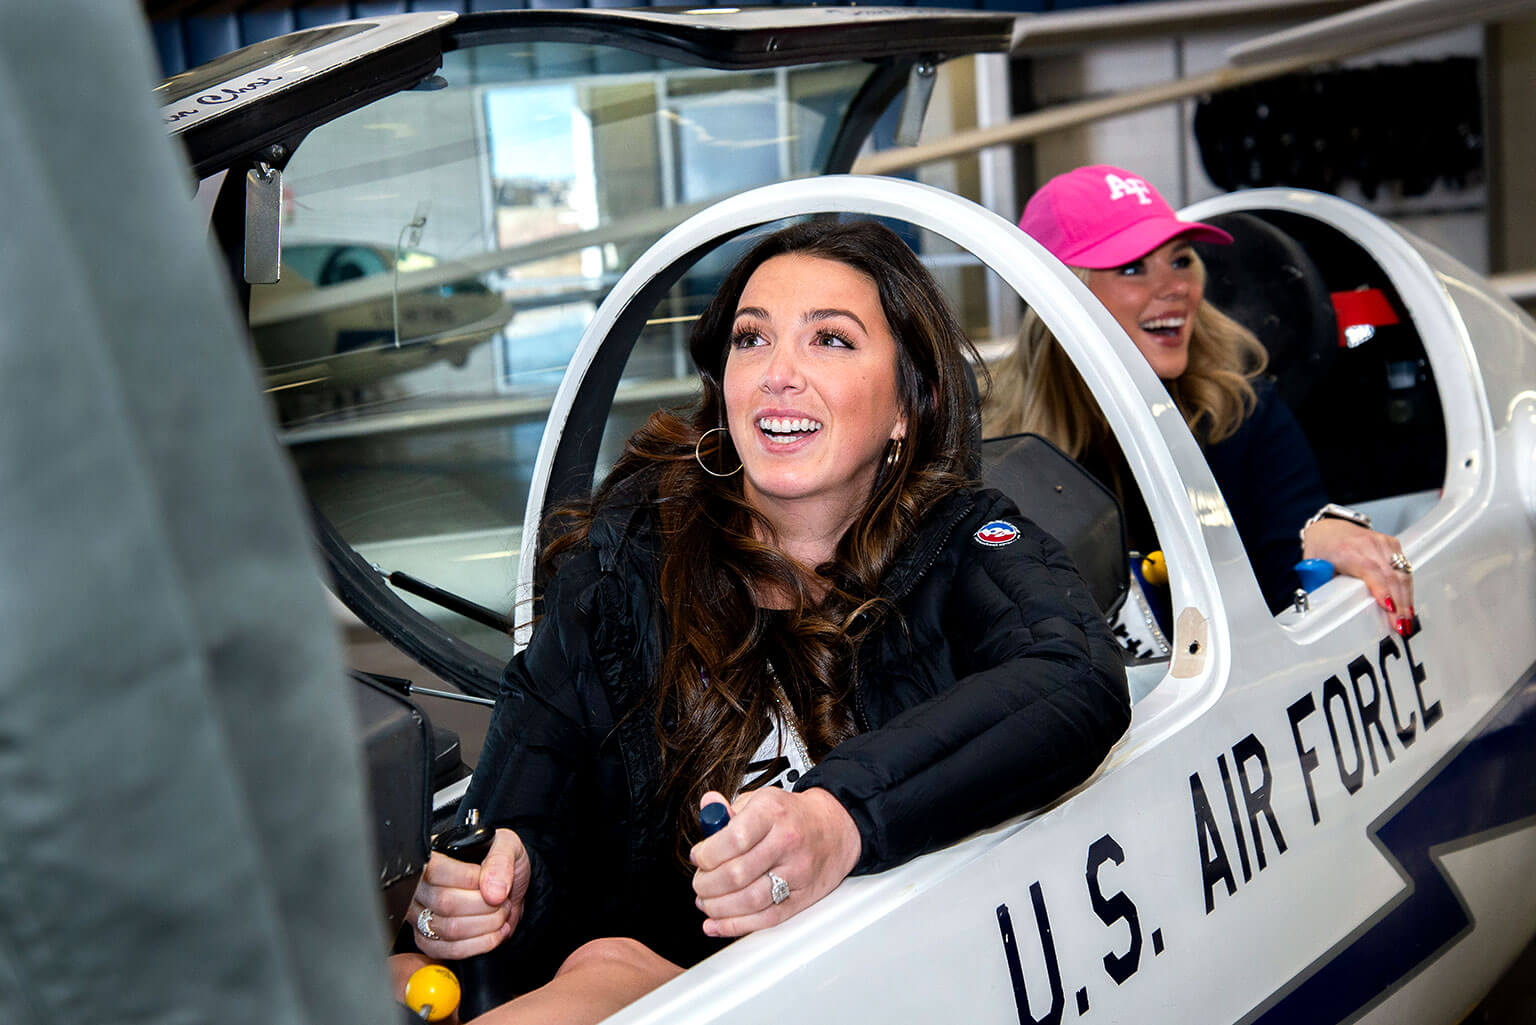 Miss Delaware Emily Beale checks out the TG-16A Glider during the Miss America Delegation’s tour of Davis Airfield.